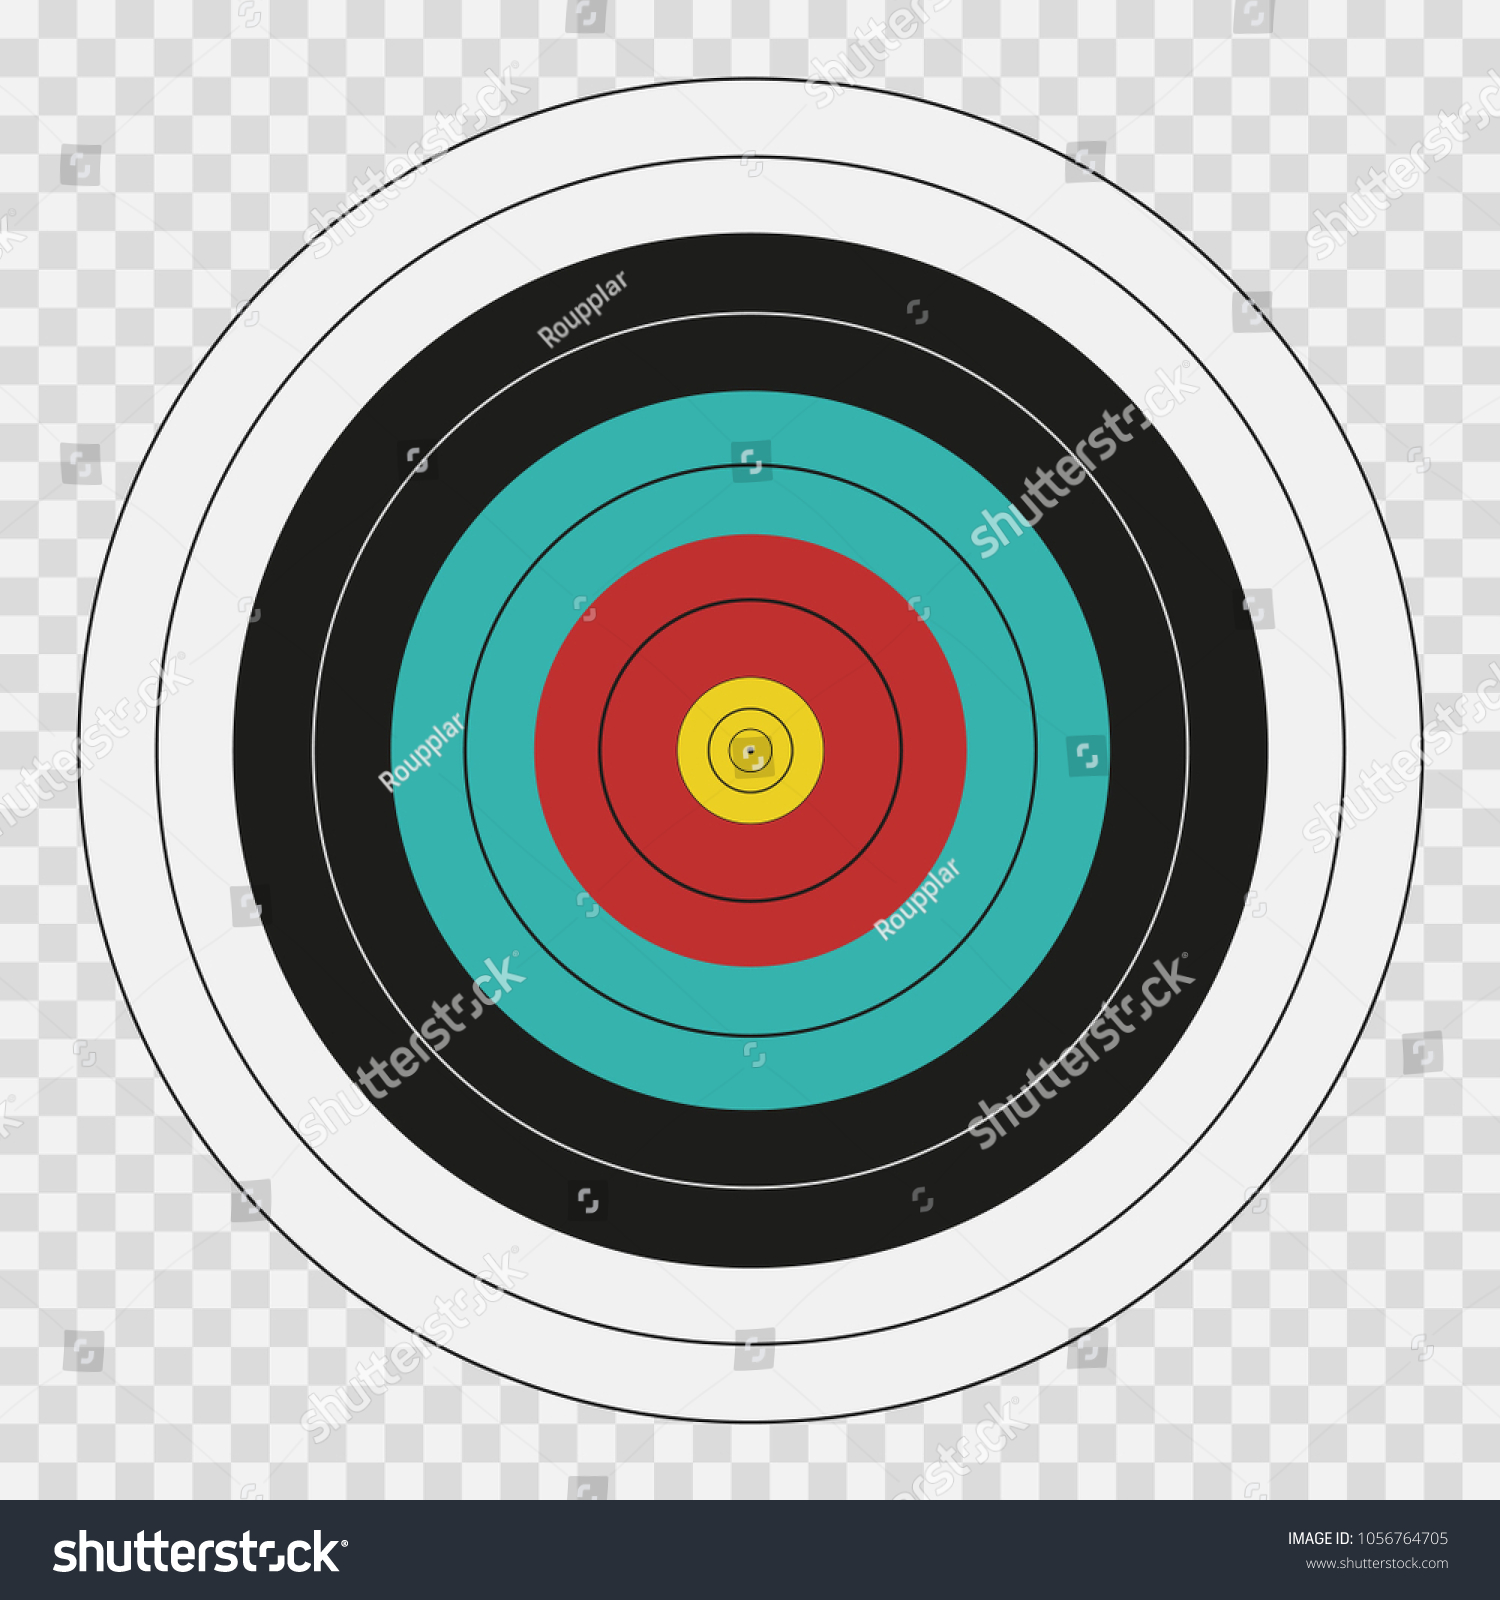 Archery Target On Transparent Background Vector Stock Vector Royalty Free